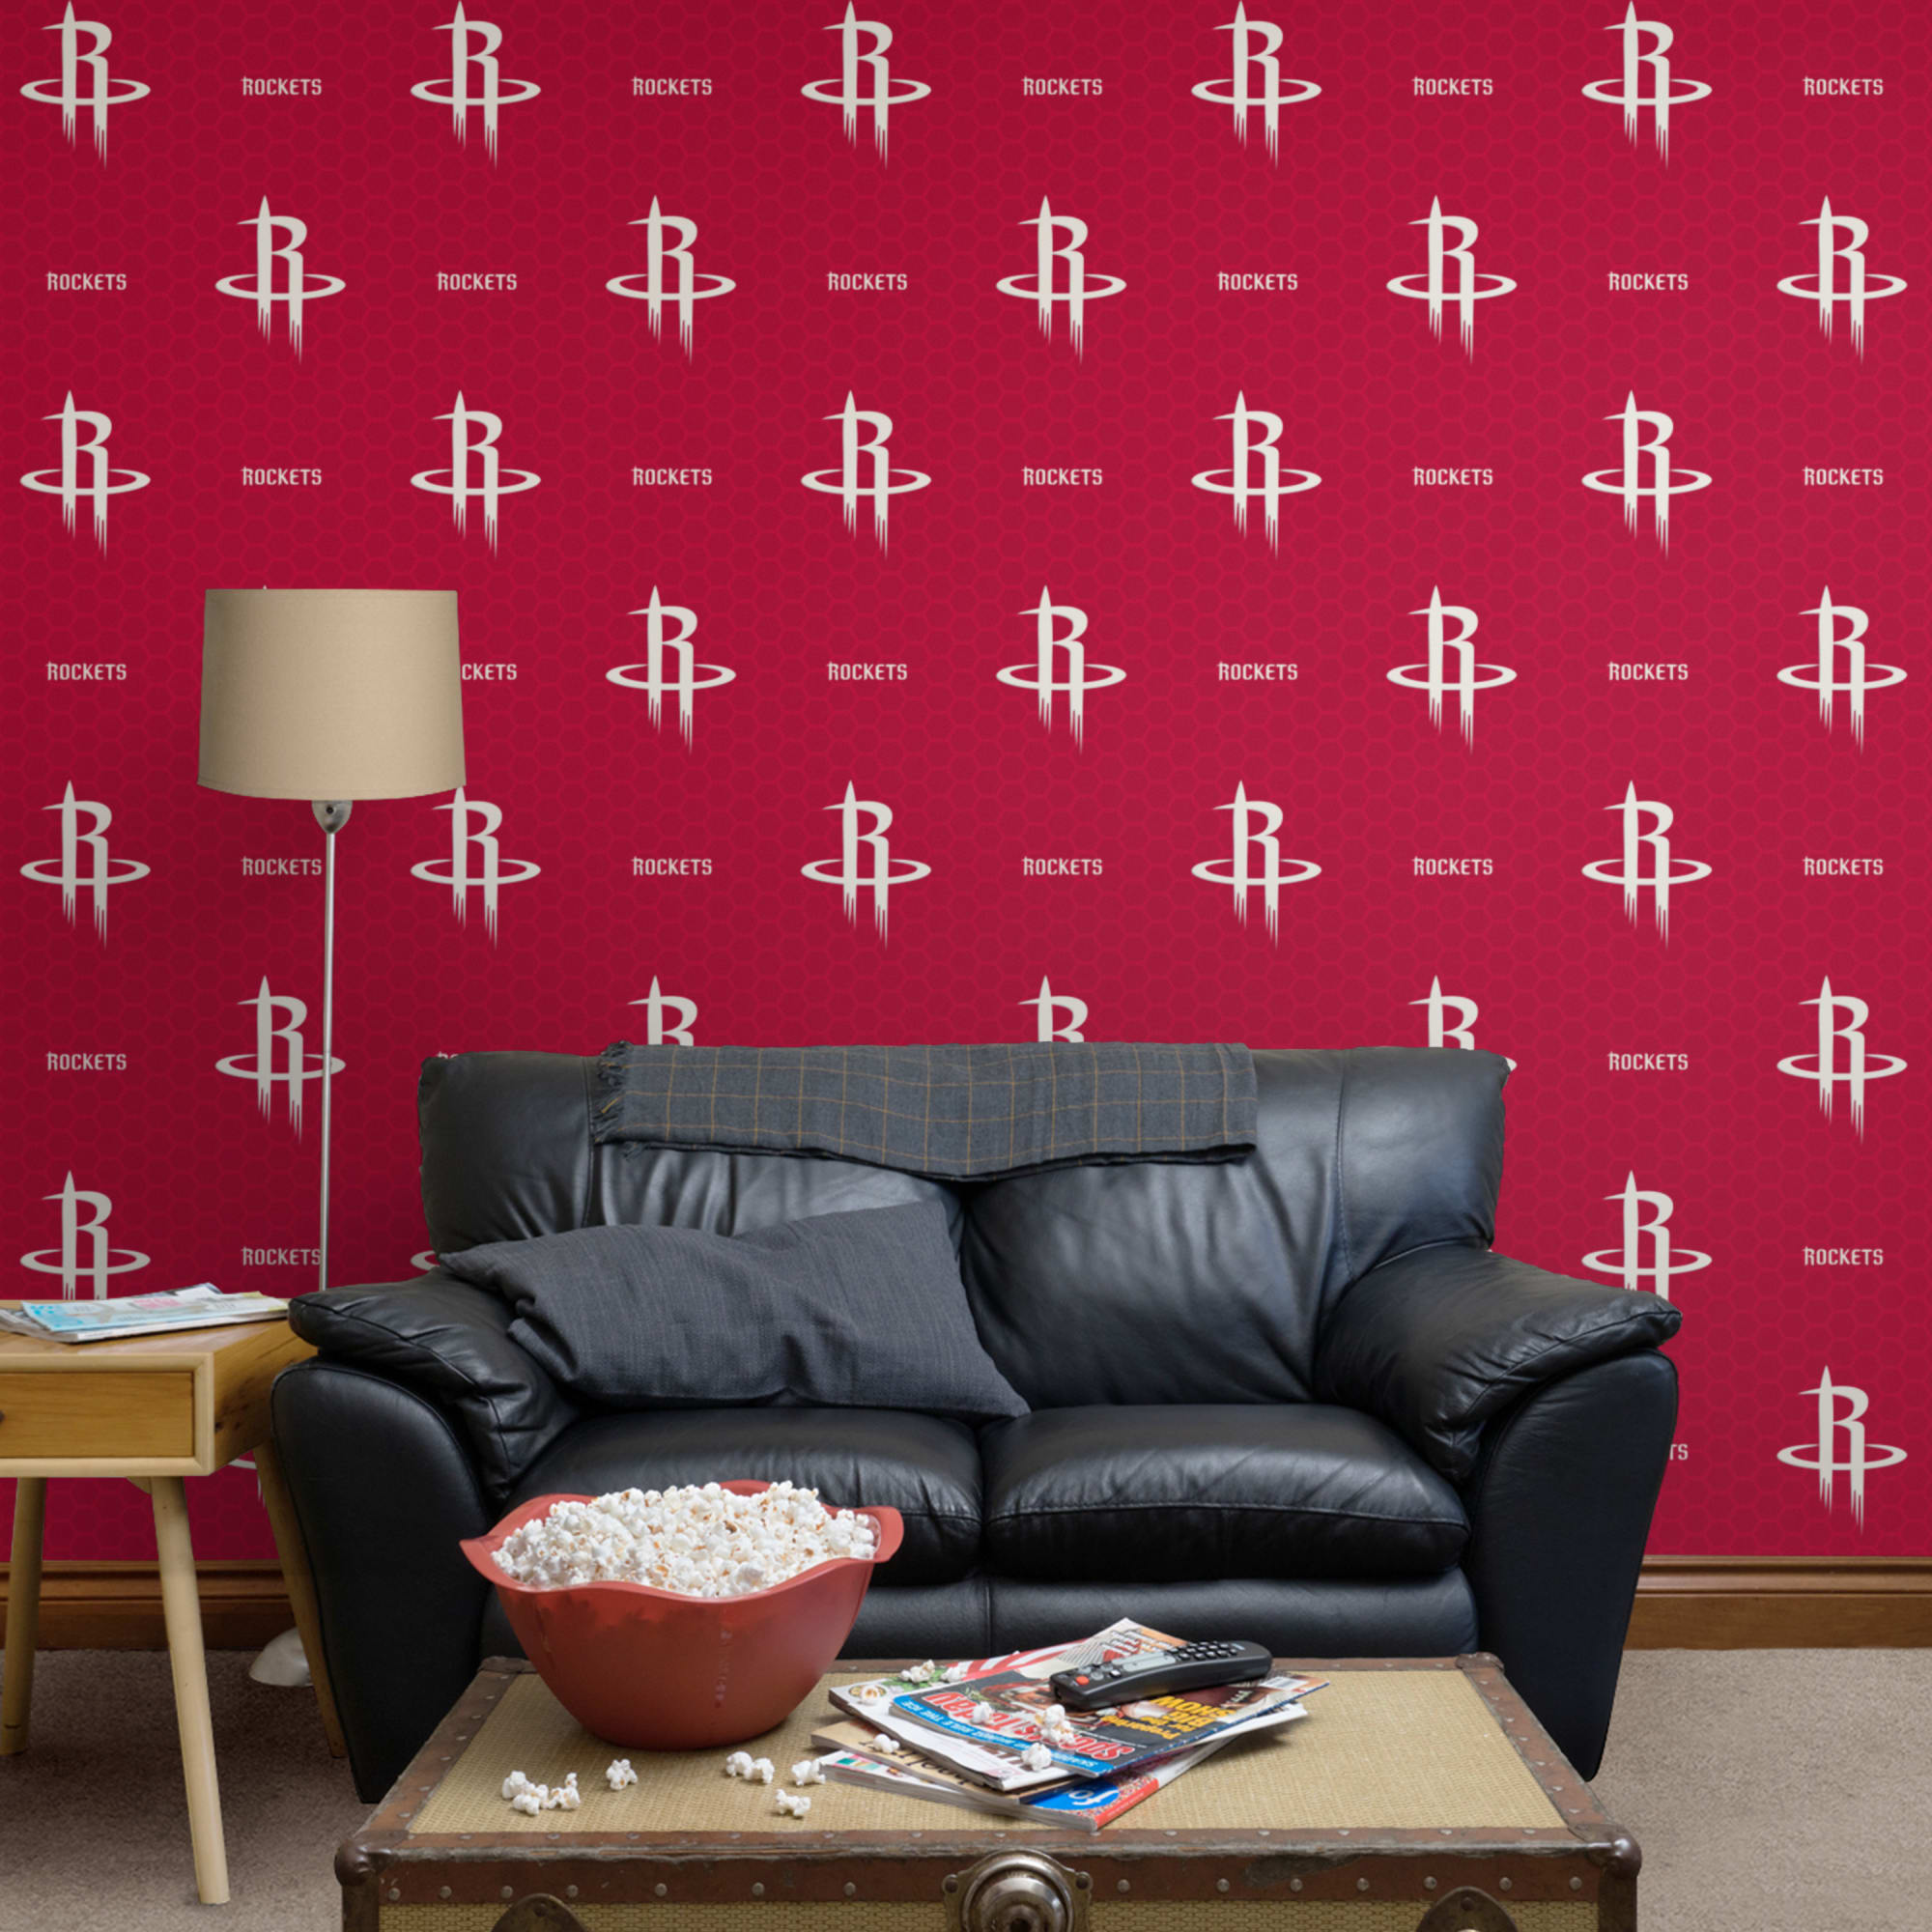 Houston Rockets: Logo Pattern - Officially Licensed Removable Wallpaper 12" x 12" Sample by Fathead | 100% Vinyl